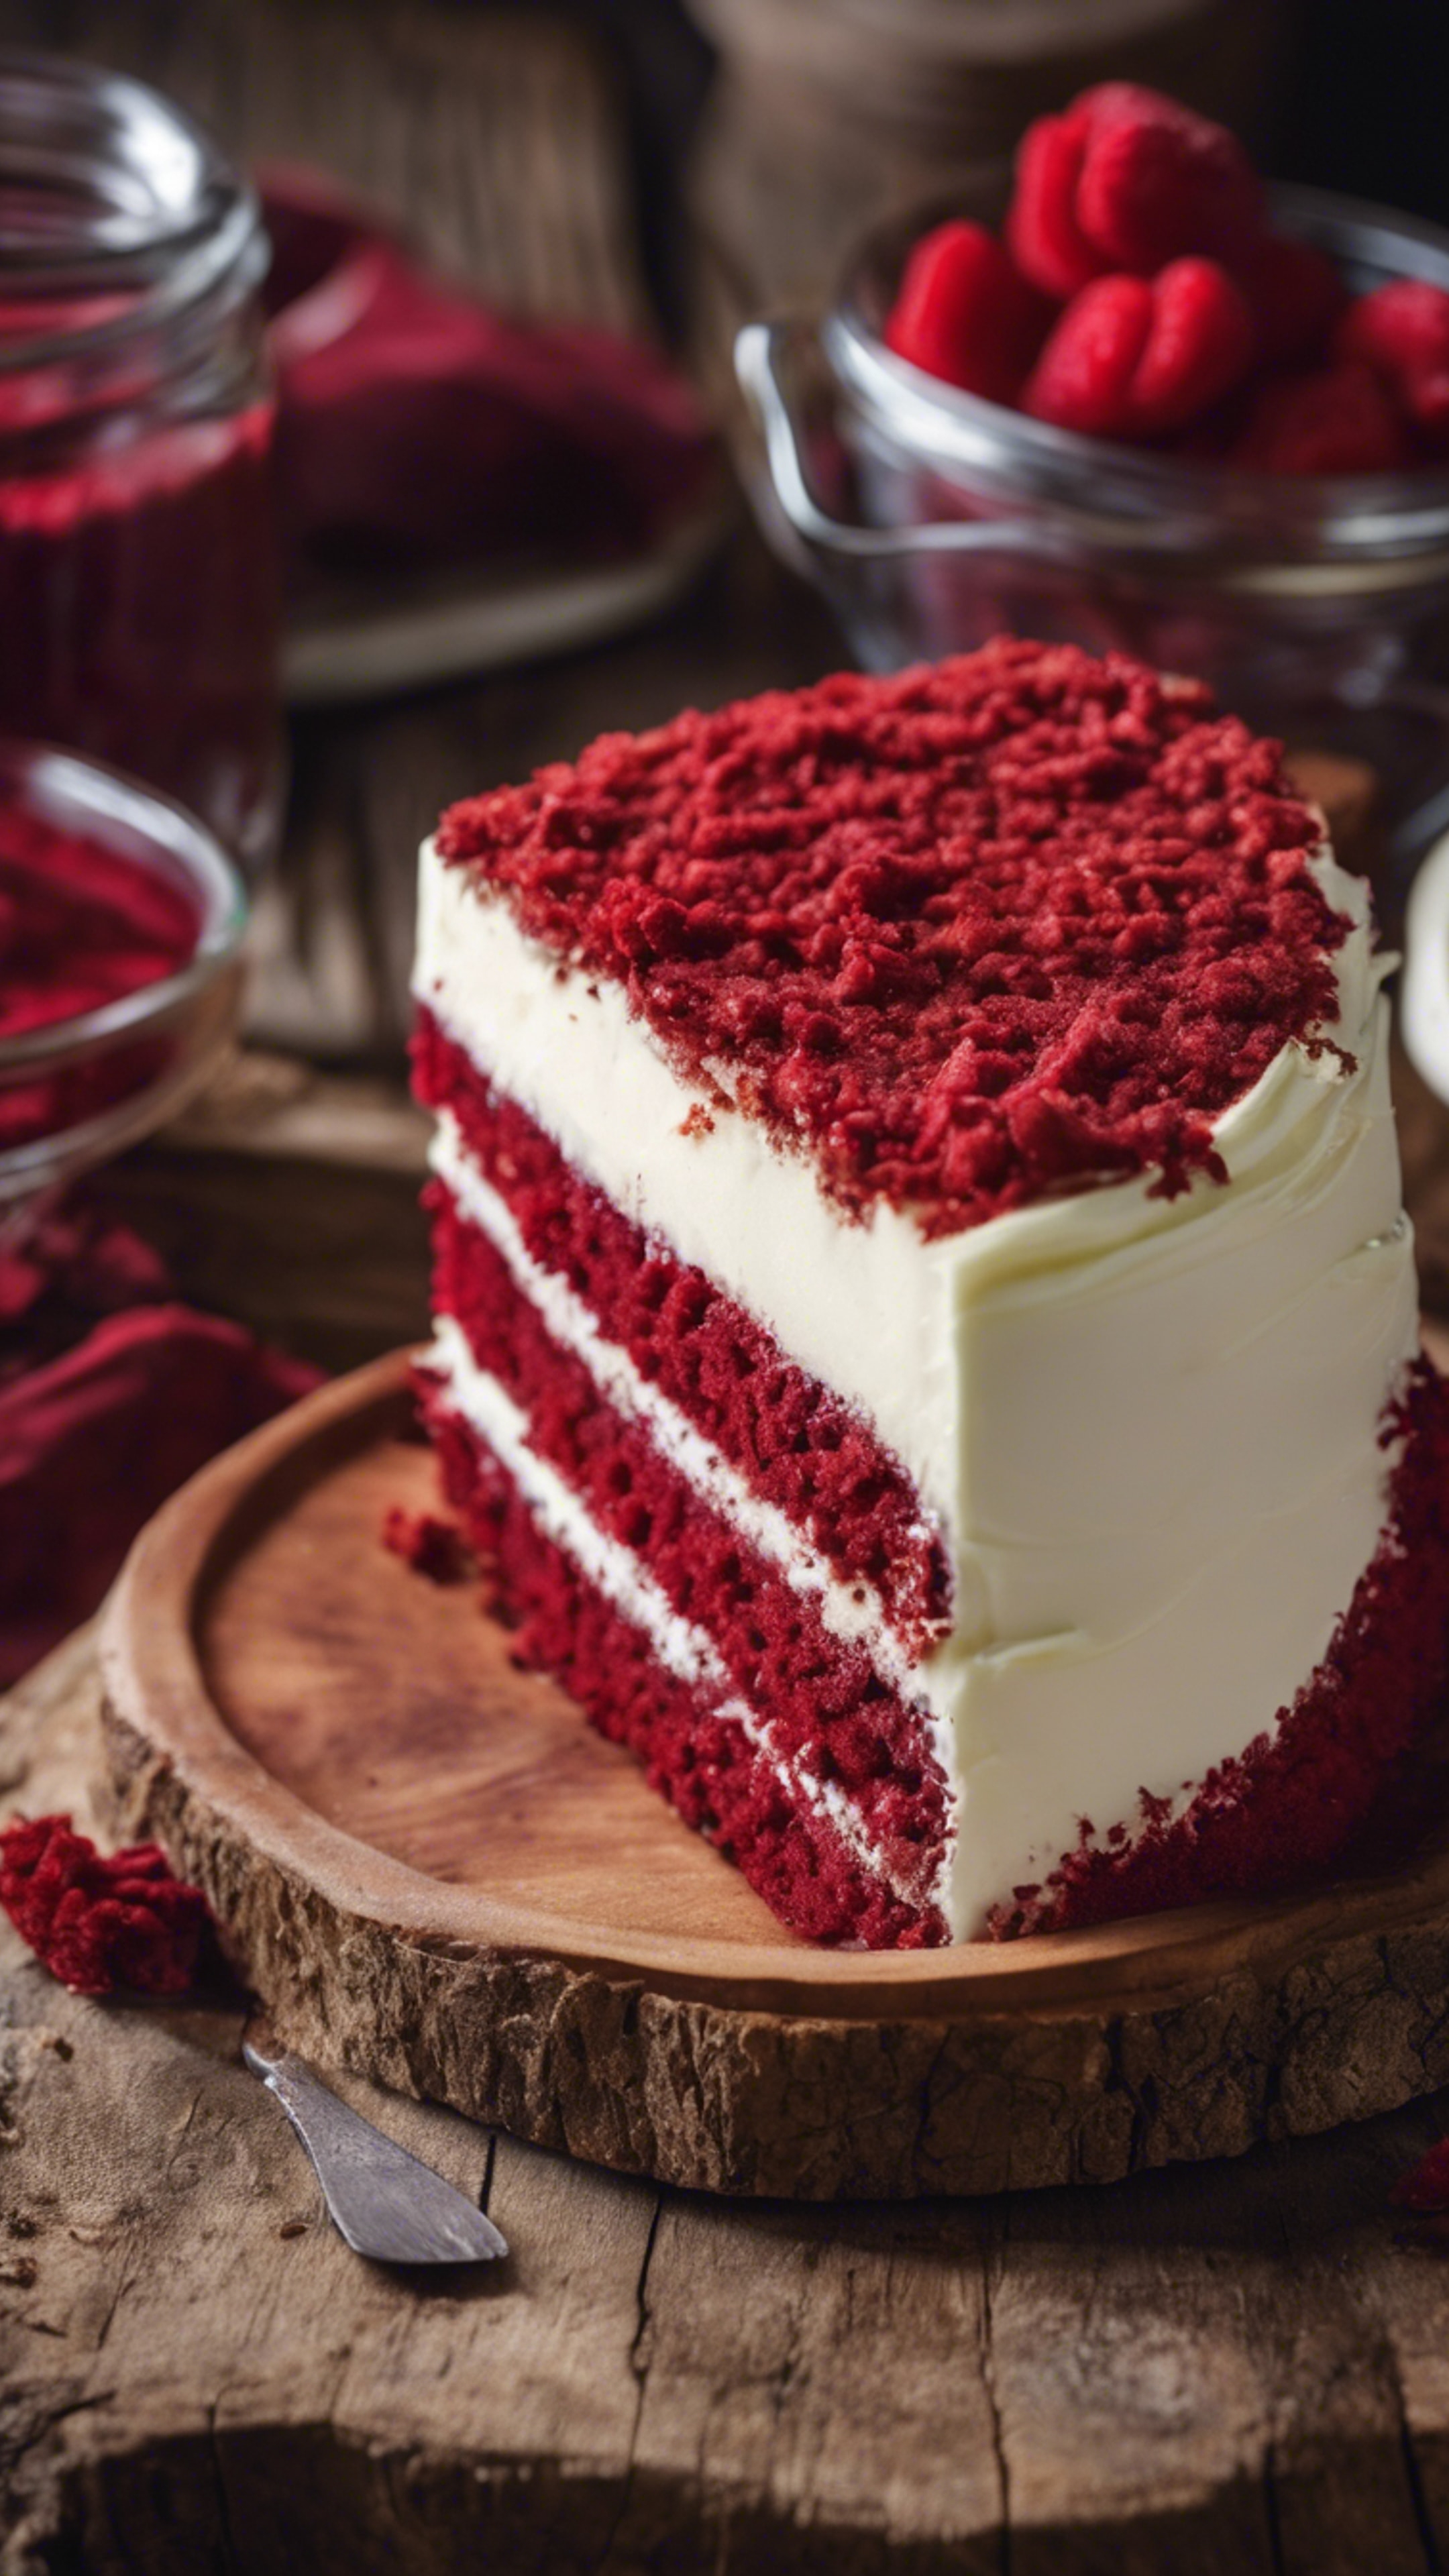 A slice of rich red velvet cake with a layer of cream cheese frosting, placed on a rustic wooden table. duvar kağıdı[5b147ad1f433484e86de]